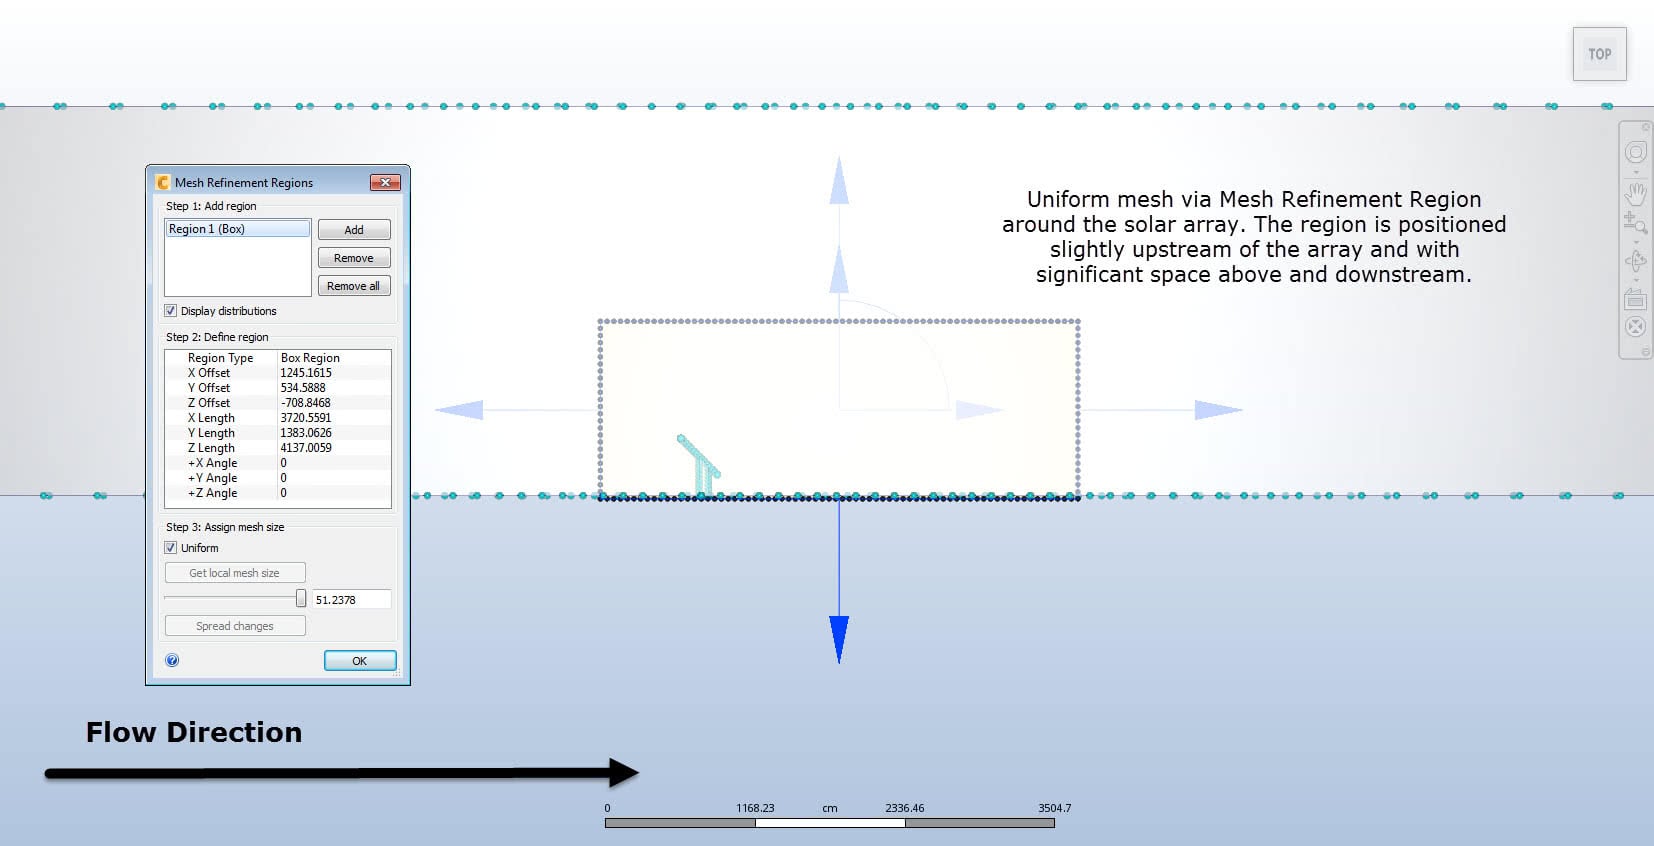 Screenshot of the Mesh Refinement Regions Dialog, with accompanying text that reads "Uniform mesh via Mesh Refinement Region around the solar array. The region is positioned slightly upstream of the array and with significant space above and downstream."